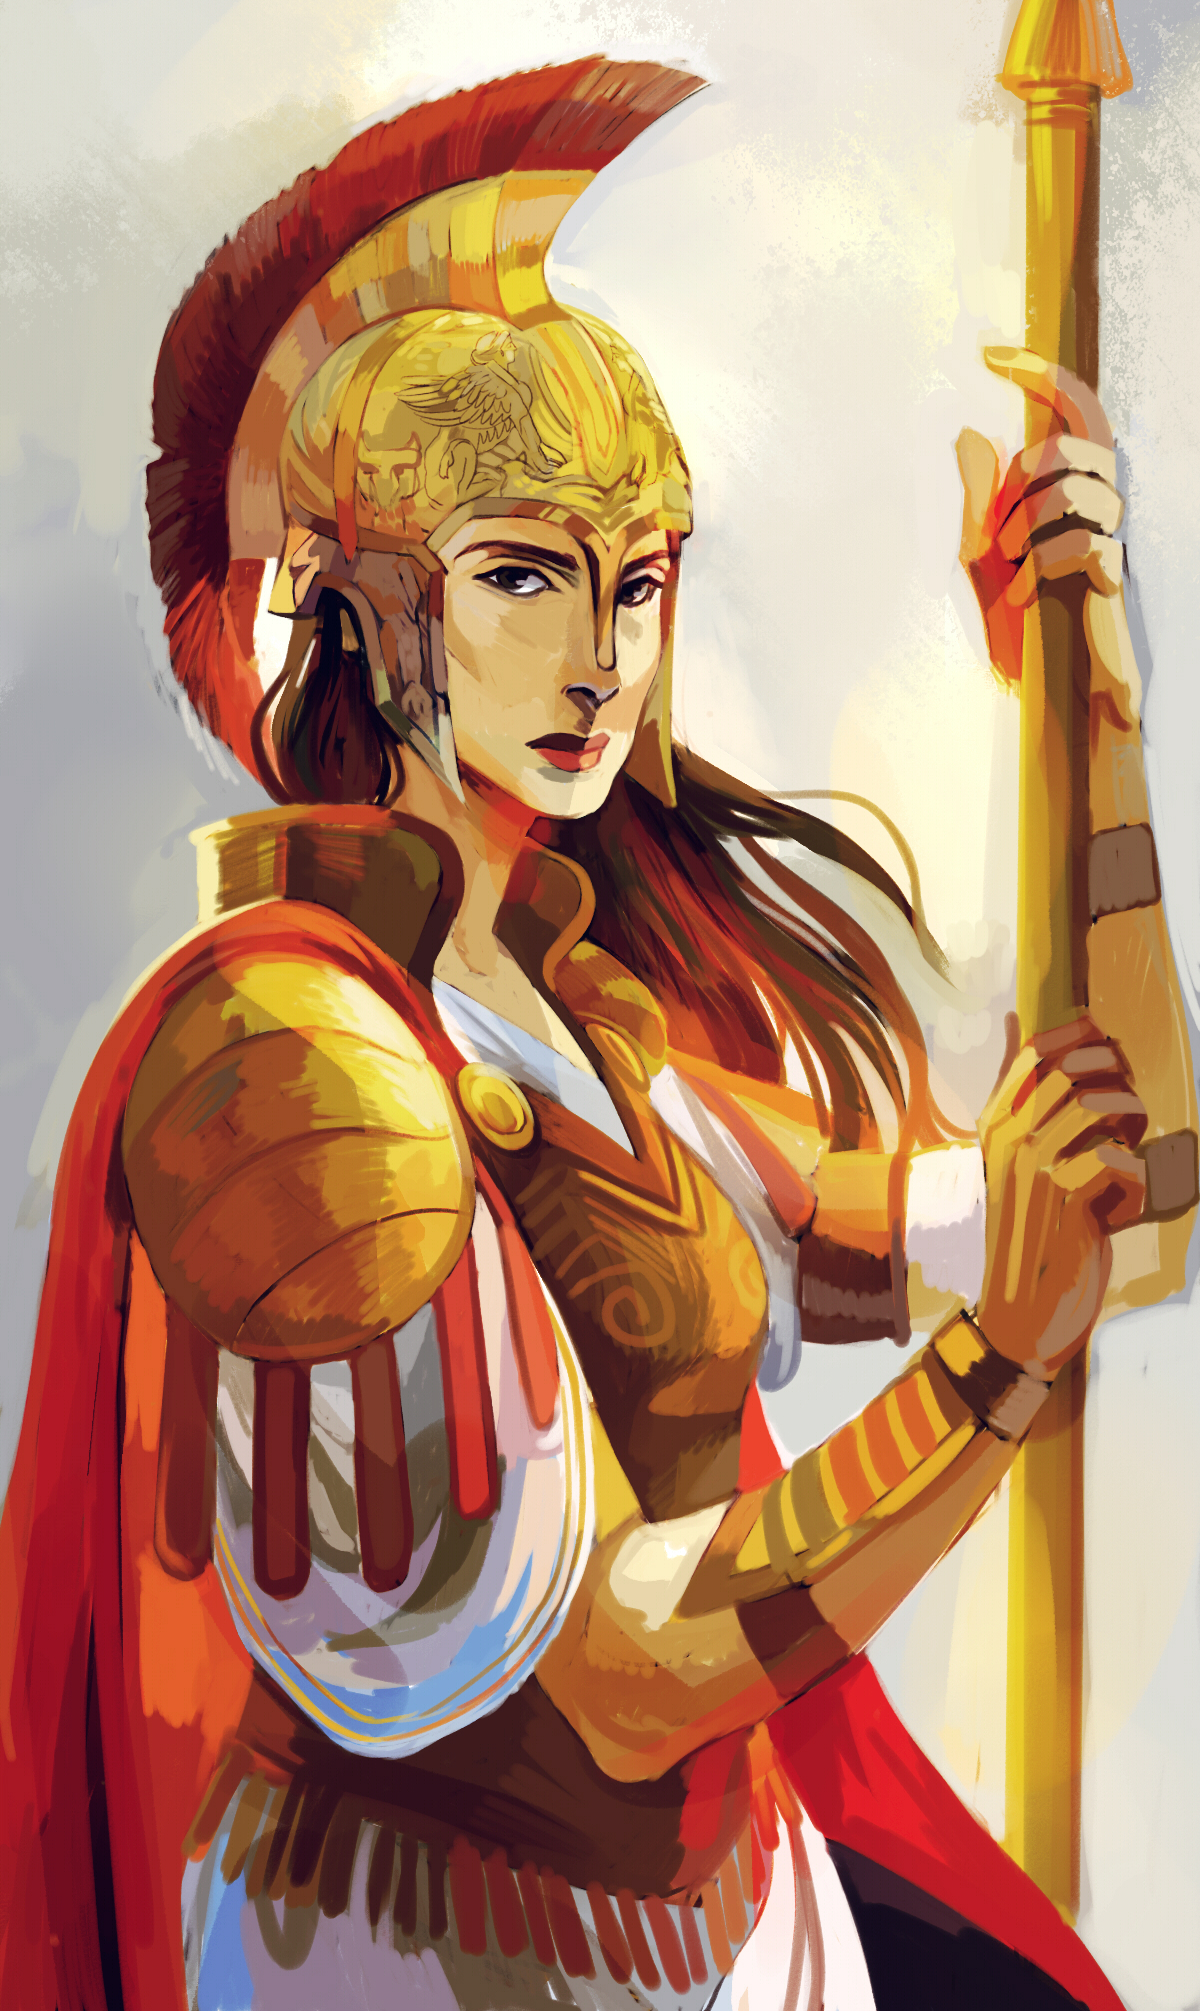 Athena from the Percy Jackson series, stands in full armor, holding a spear. 